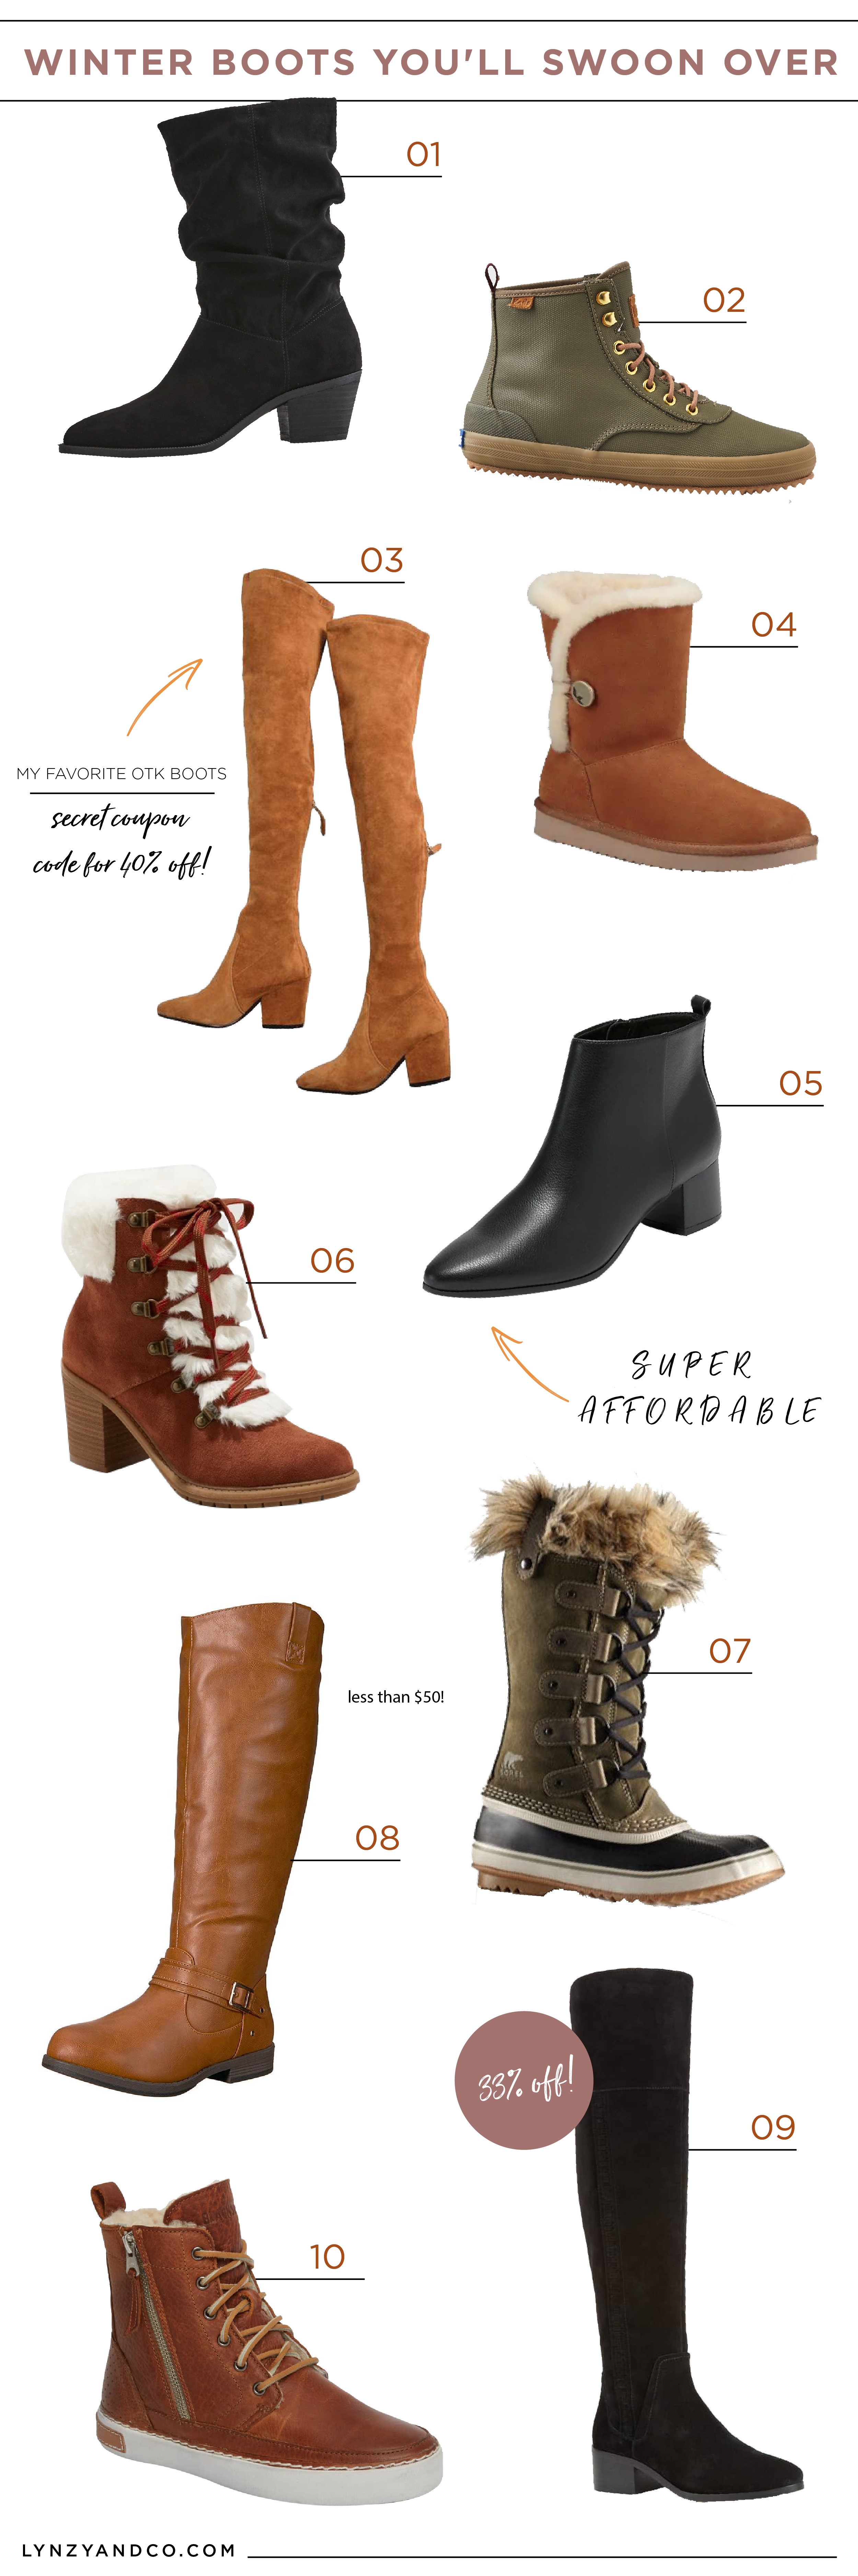 Winter Boots You'll Swoon Over - Lynzy 